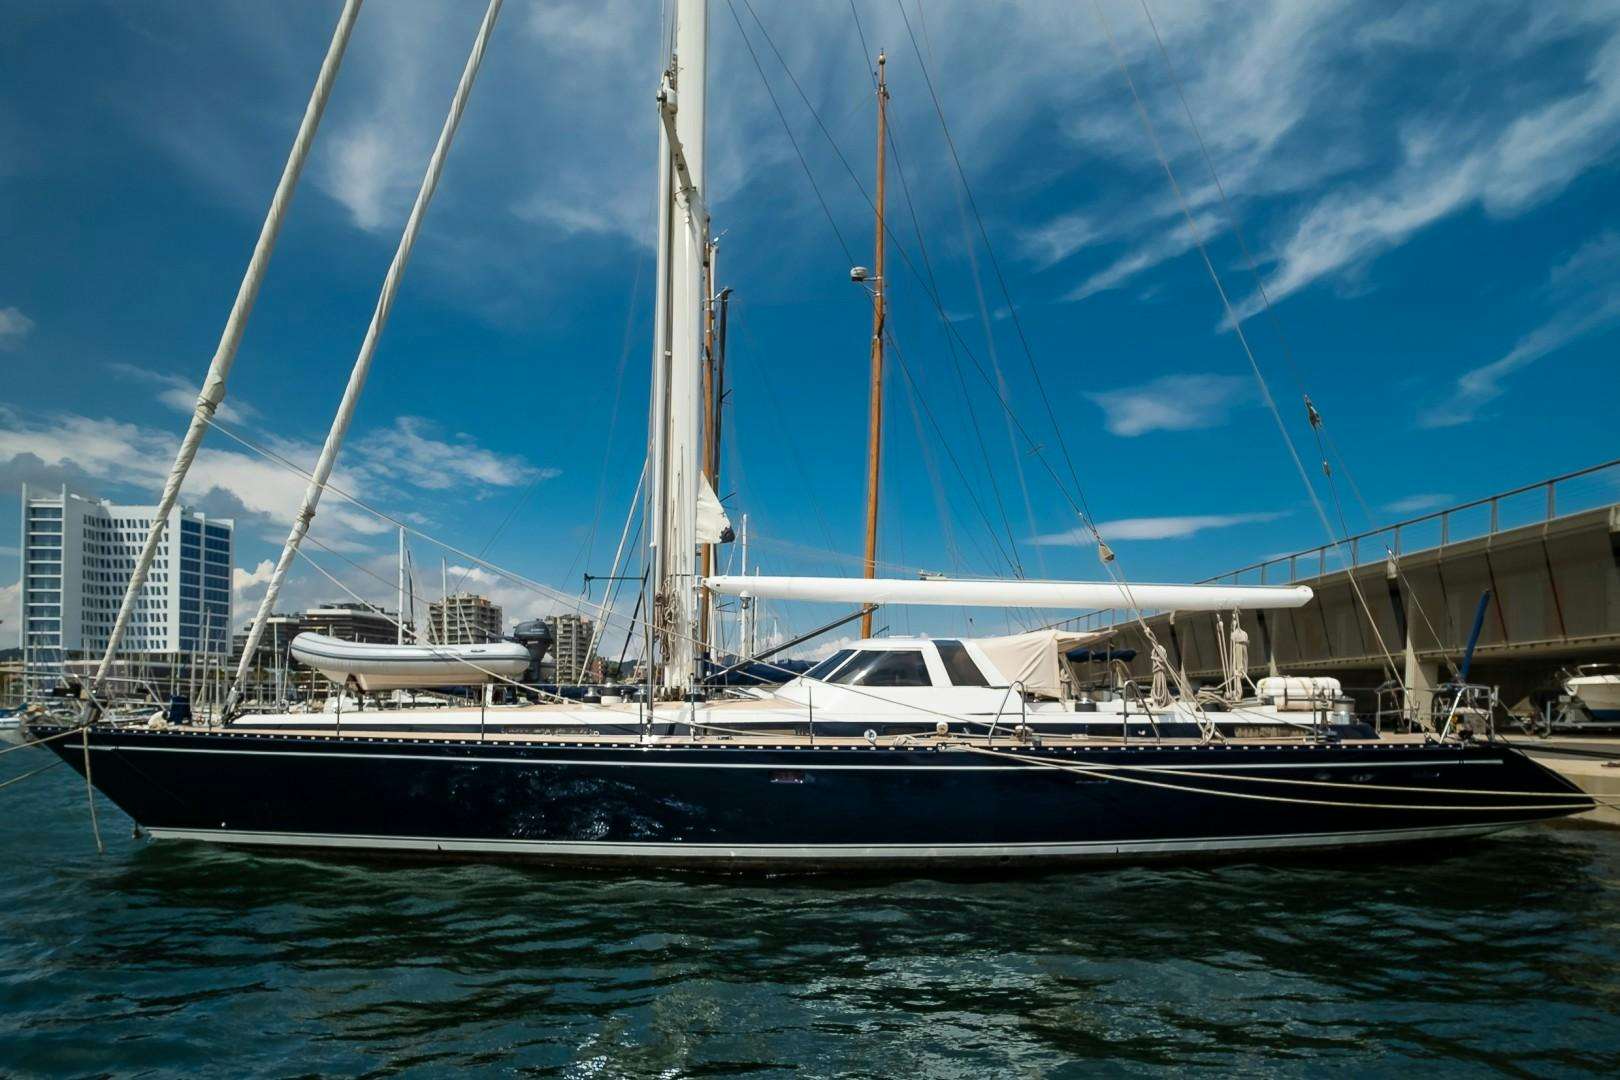 Arquimedes
Yacht for Sale